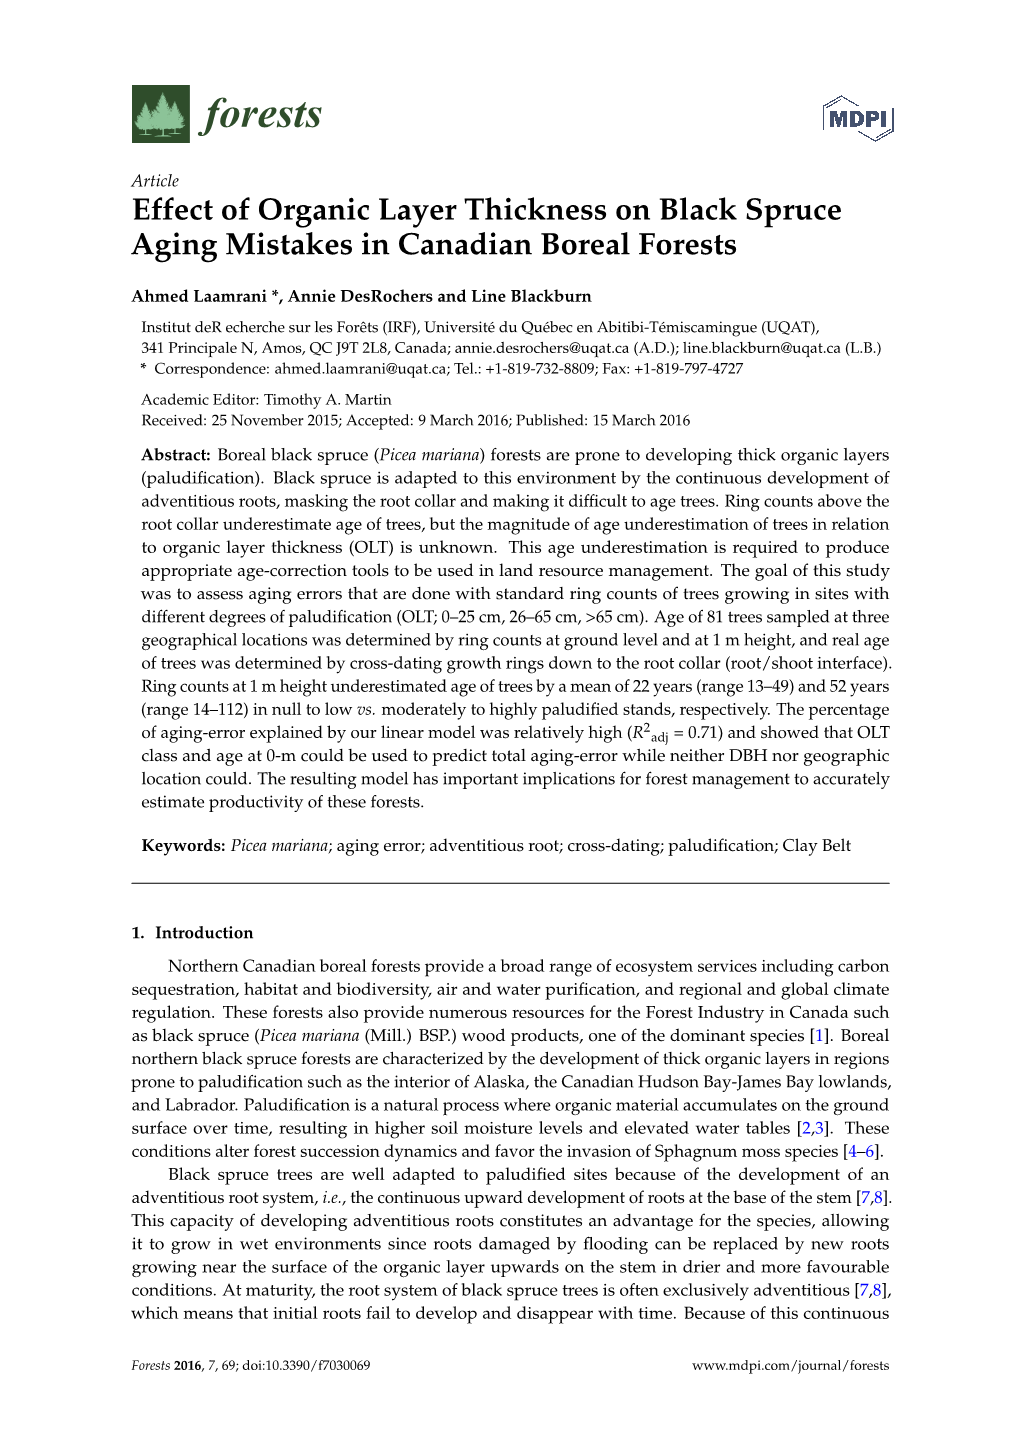 Effect of Organic Layer Thickness on Black Spruce Aging Mistakes in Canadian Boreal Forests